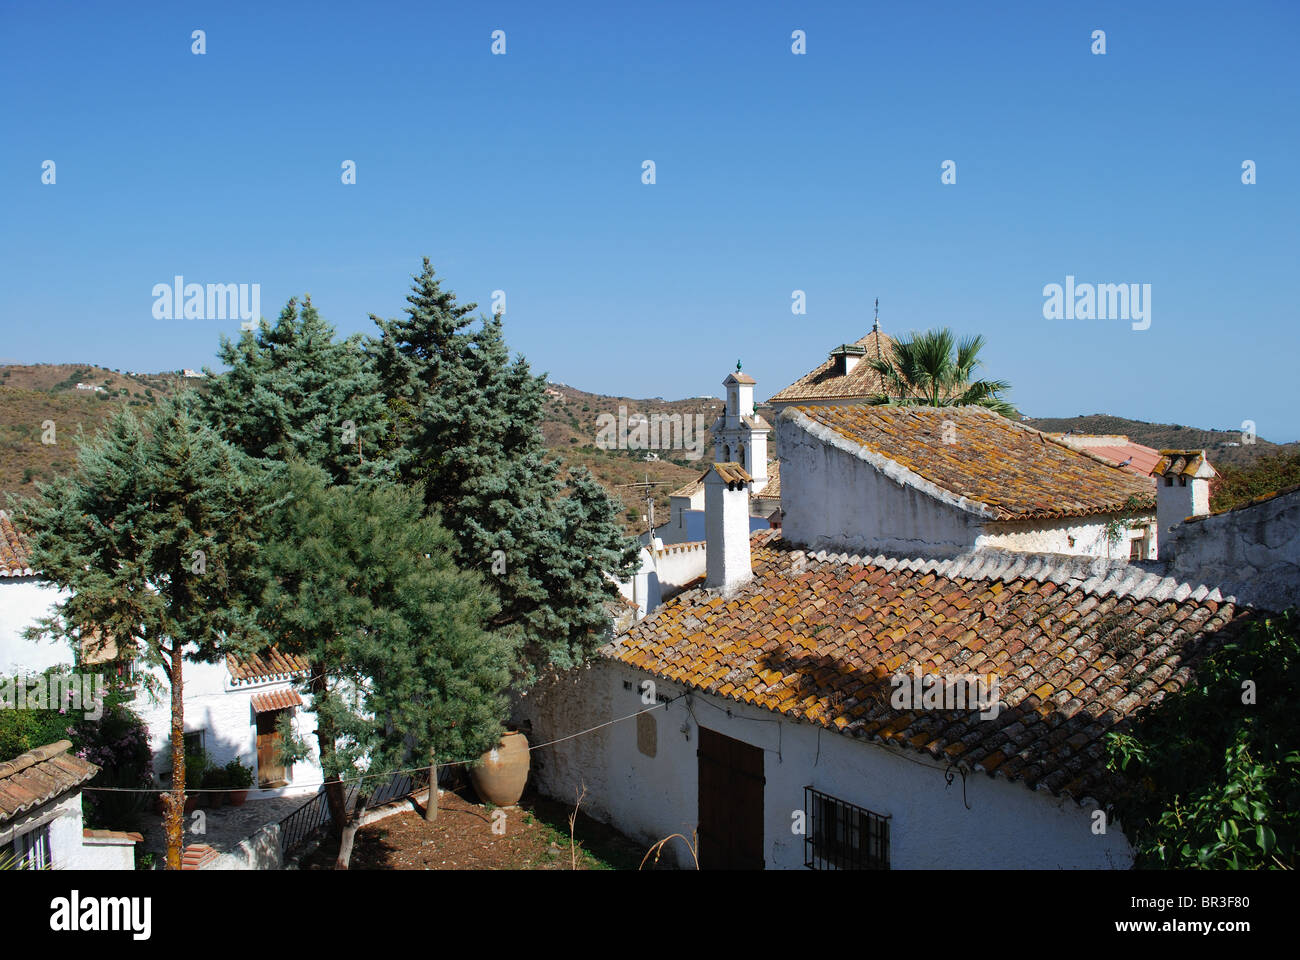 View over village rooftops, whitewashed village (pueblo blanco), Macharaviaya, Costa del Sol, Malaga Province, Andalucia, Spain. Stock Photo